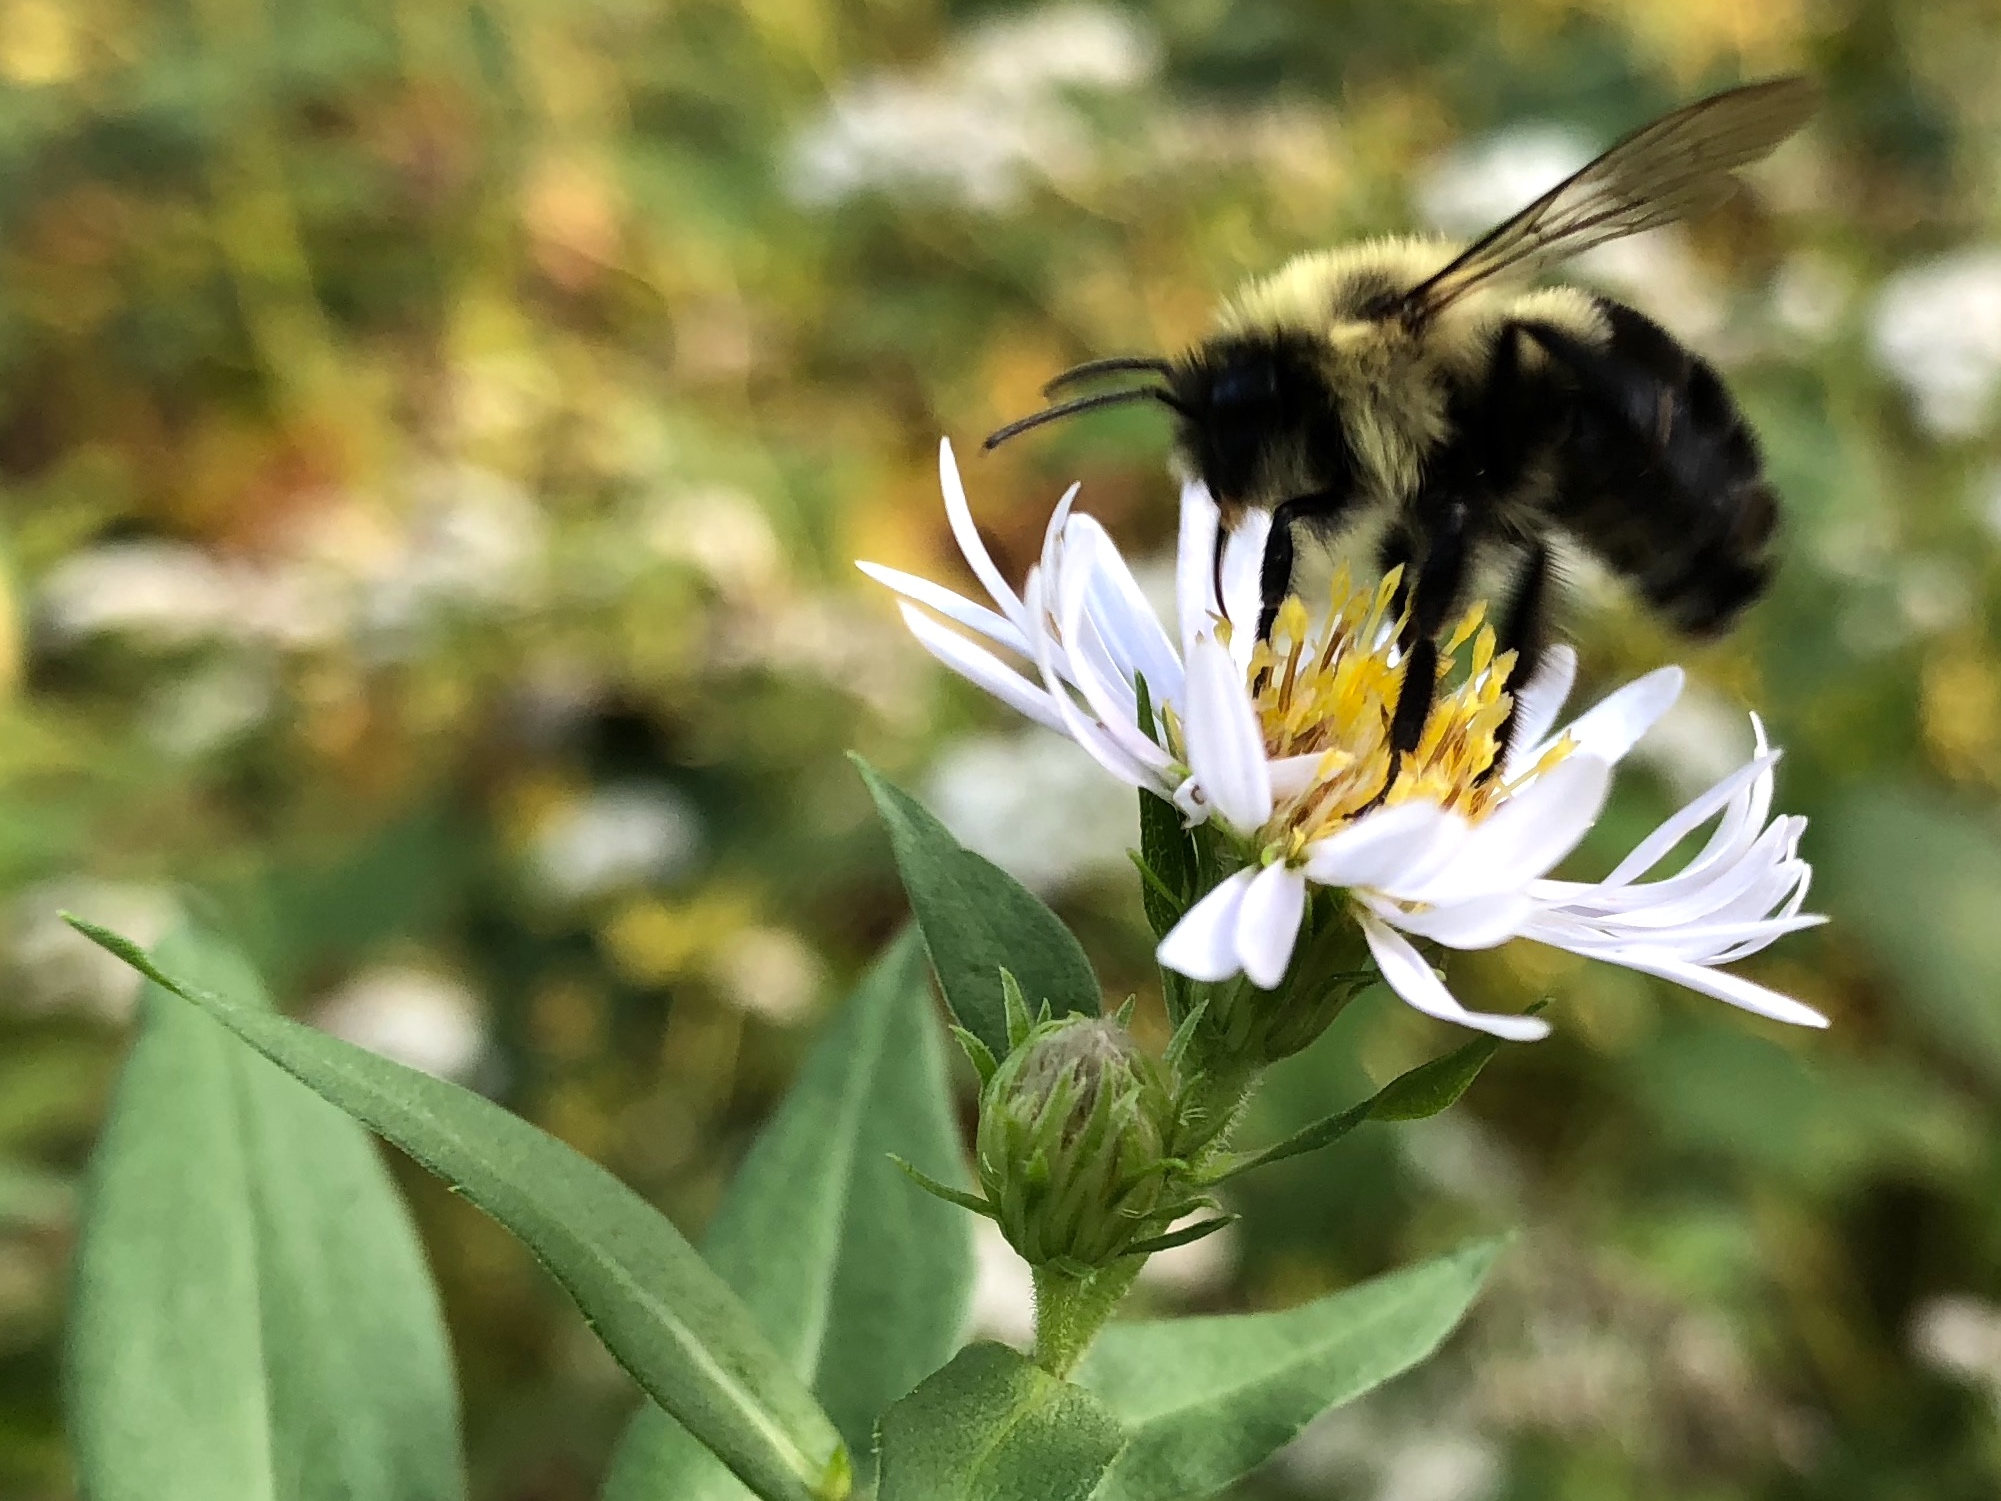 Bumblebee on Aster on September 20, 2018.